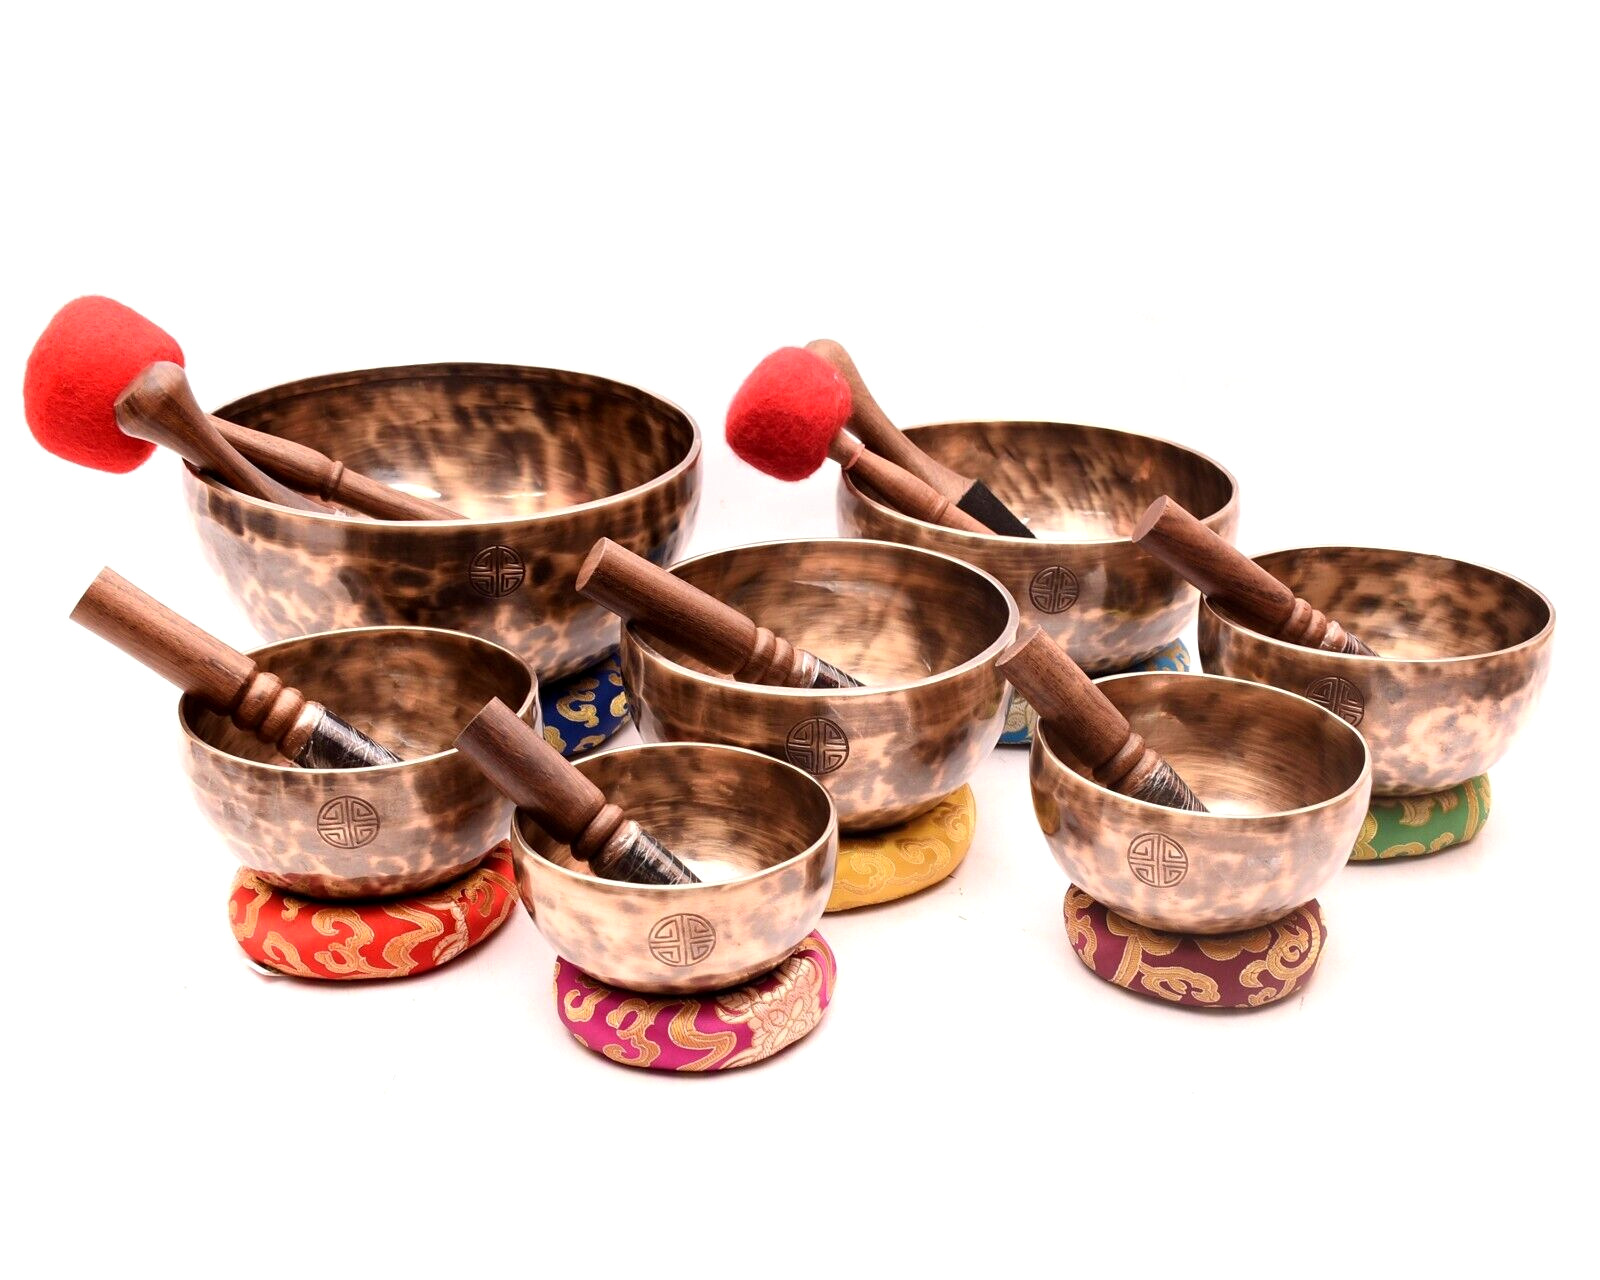 5 inch to 10 inches Professional Sound healing full moon singing bowl set of 7